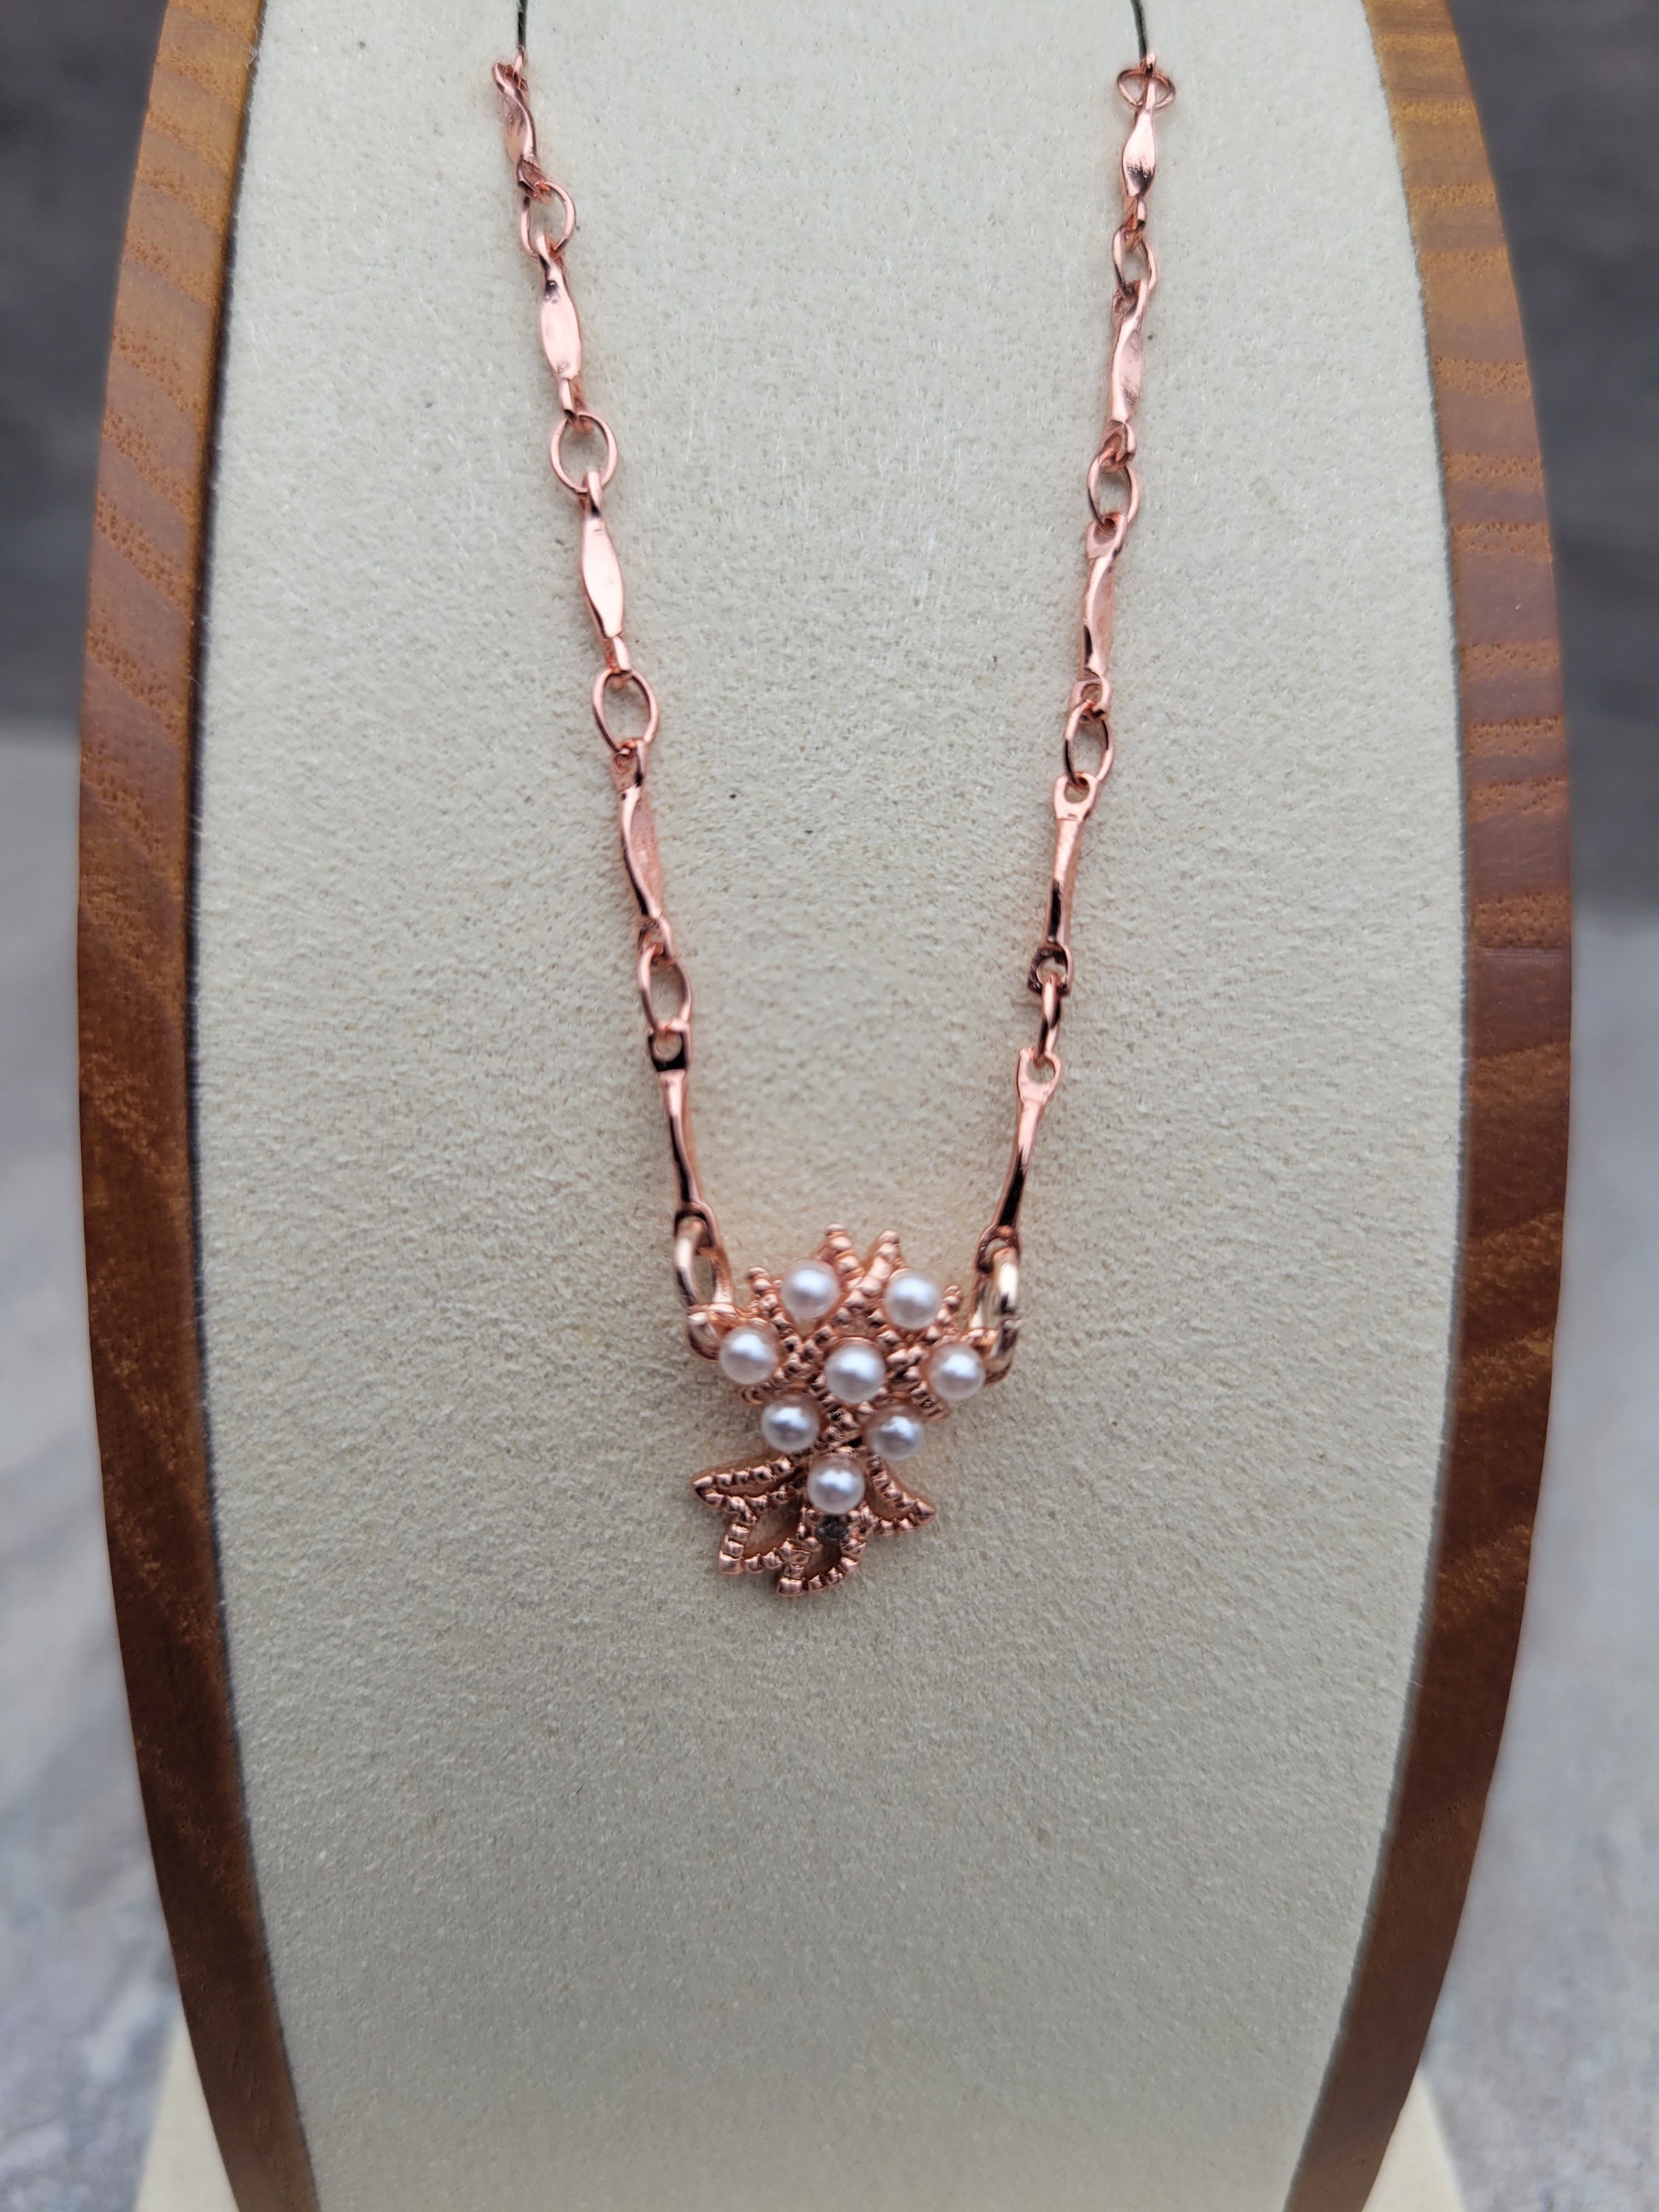 Upside Down Pineapple Pendant - Pineapple Necklace, Lifestyle Swinger Pineapples 16 Inches / 14K Rose & White Gold